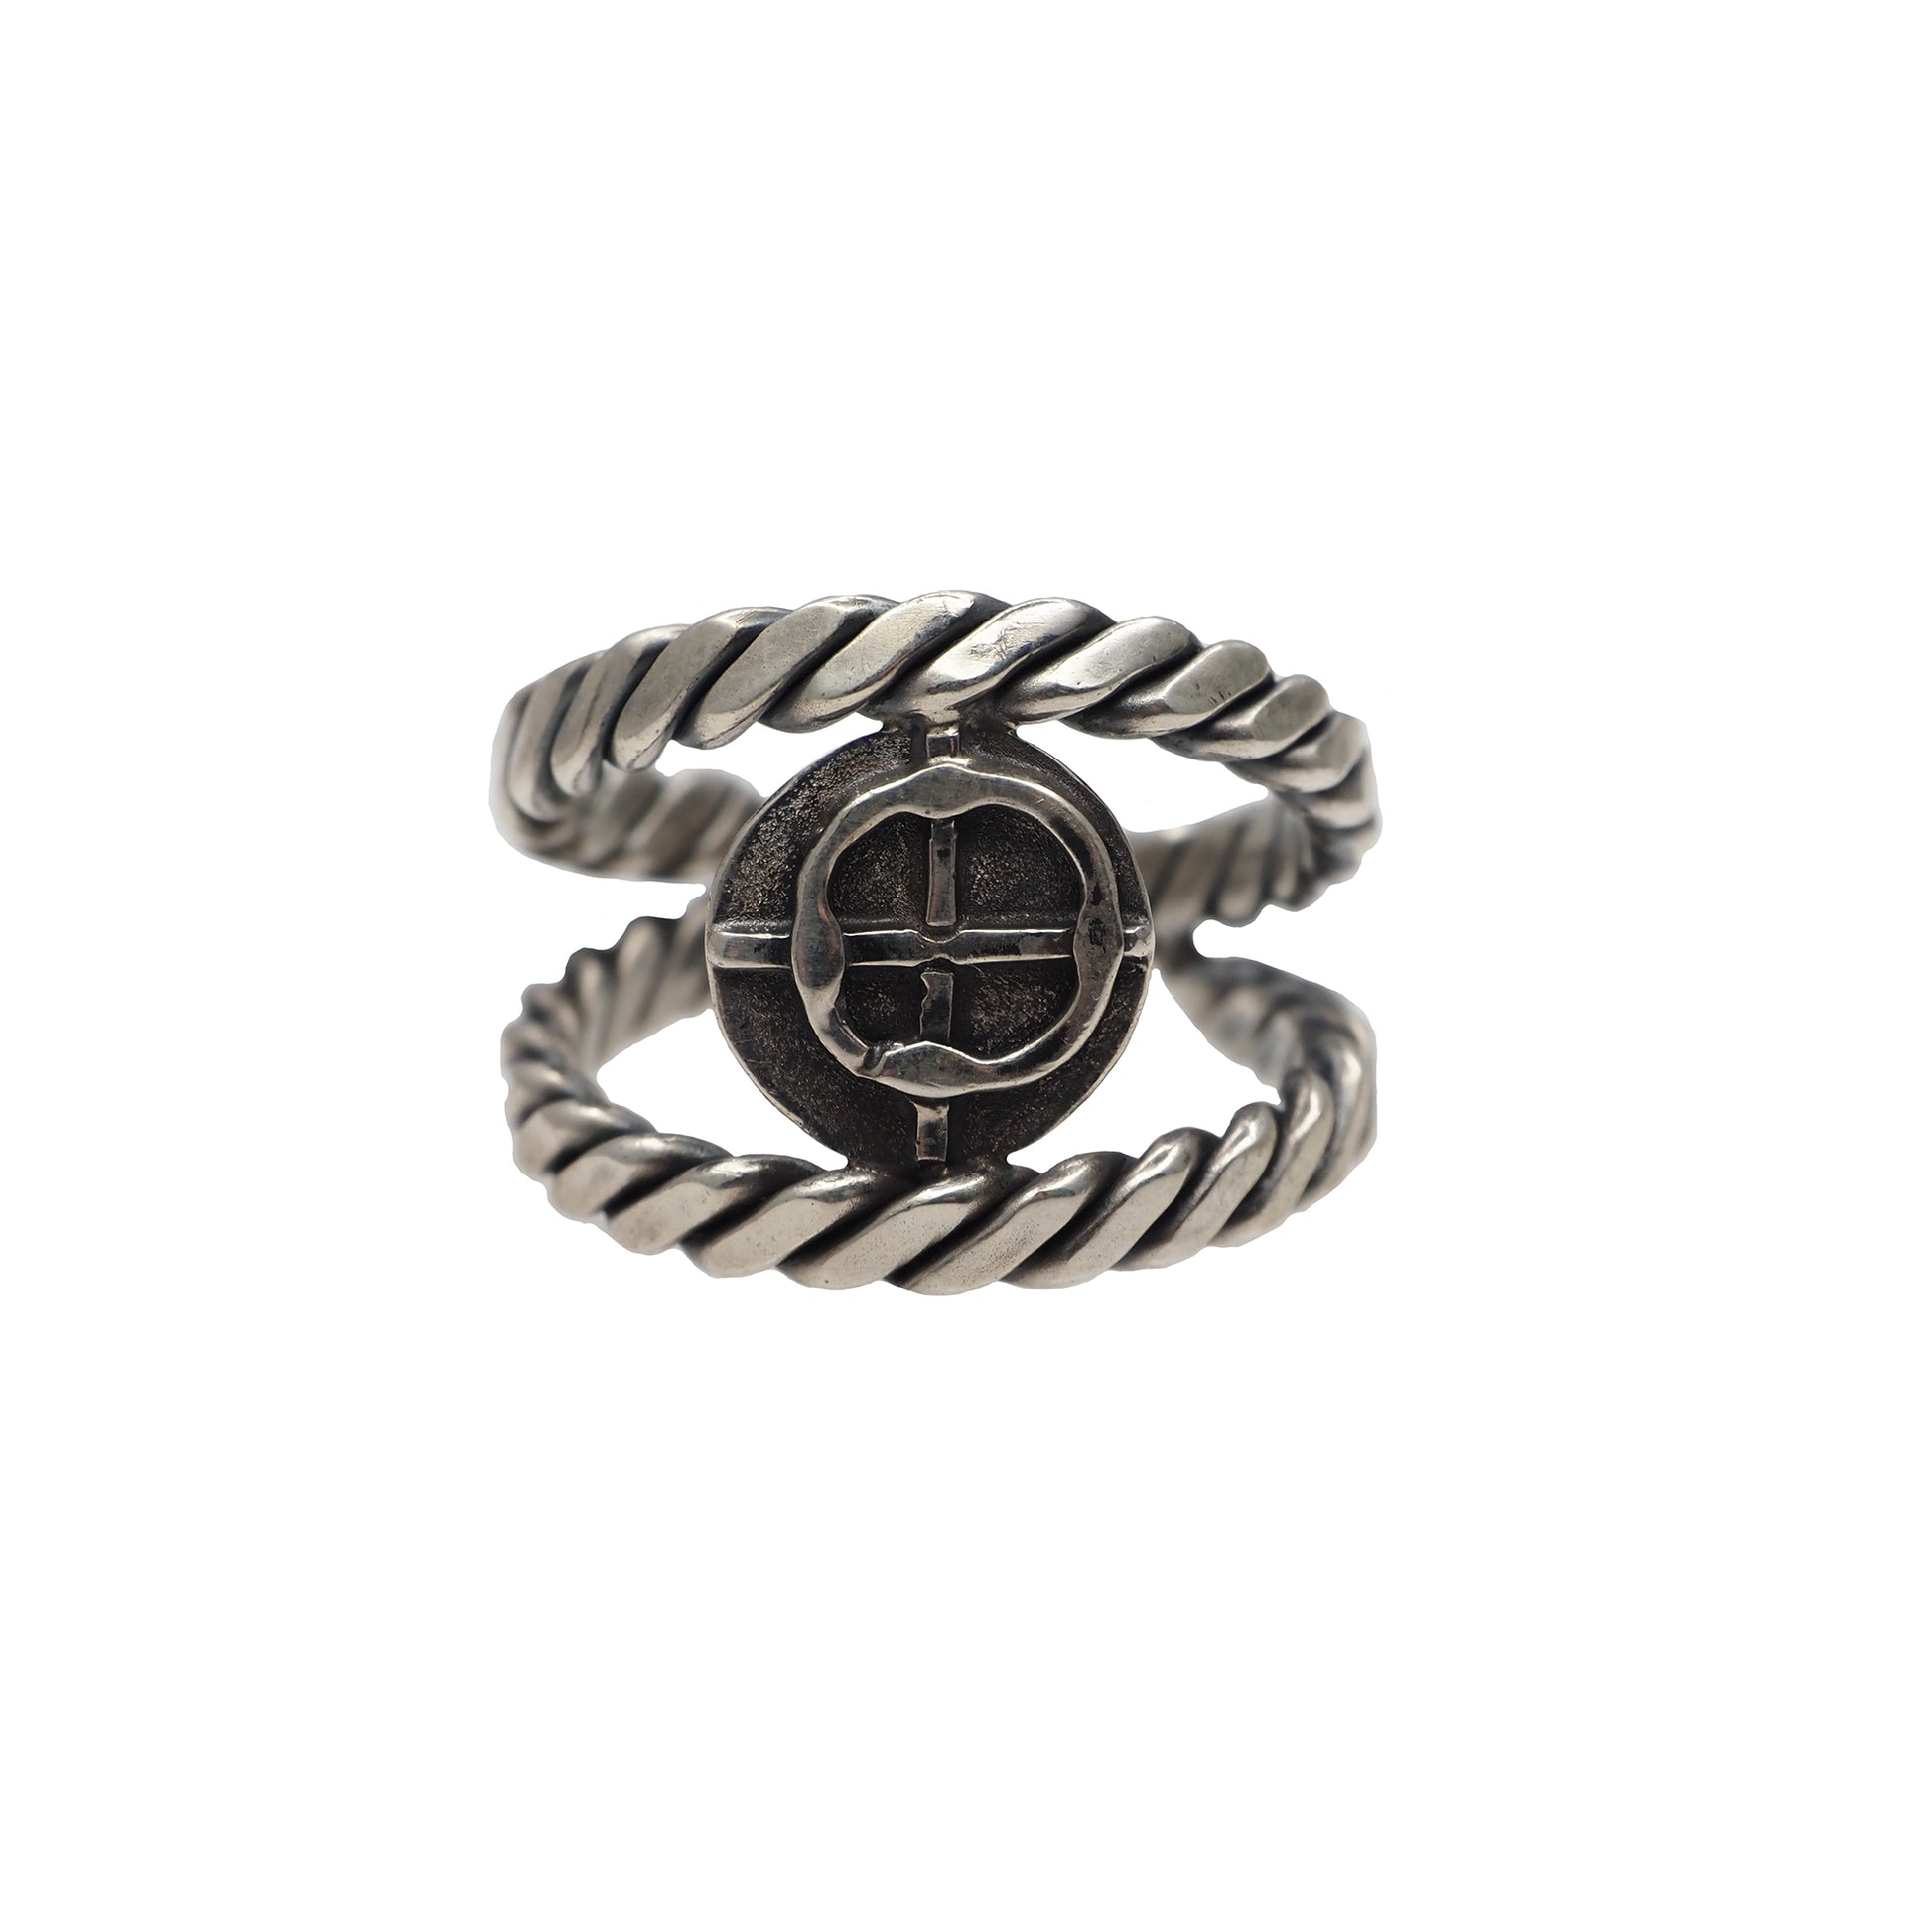 silver rope ring with cross coin in the center in the pirate style on the white background